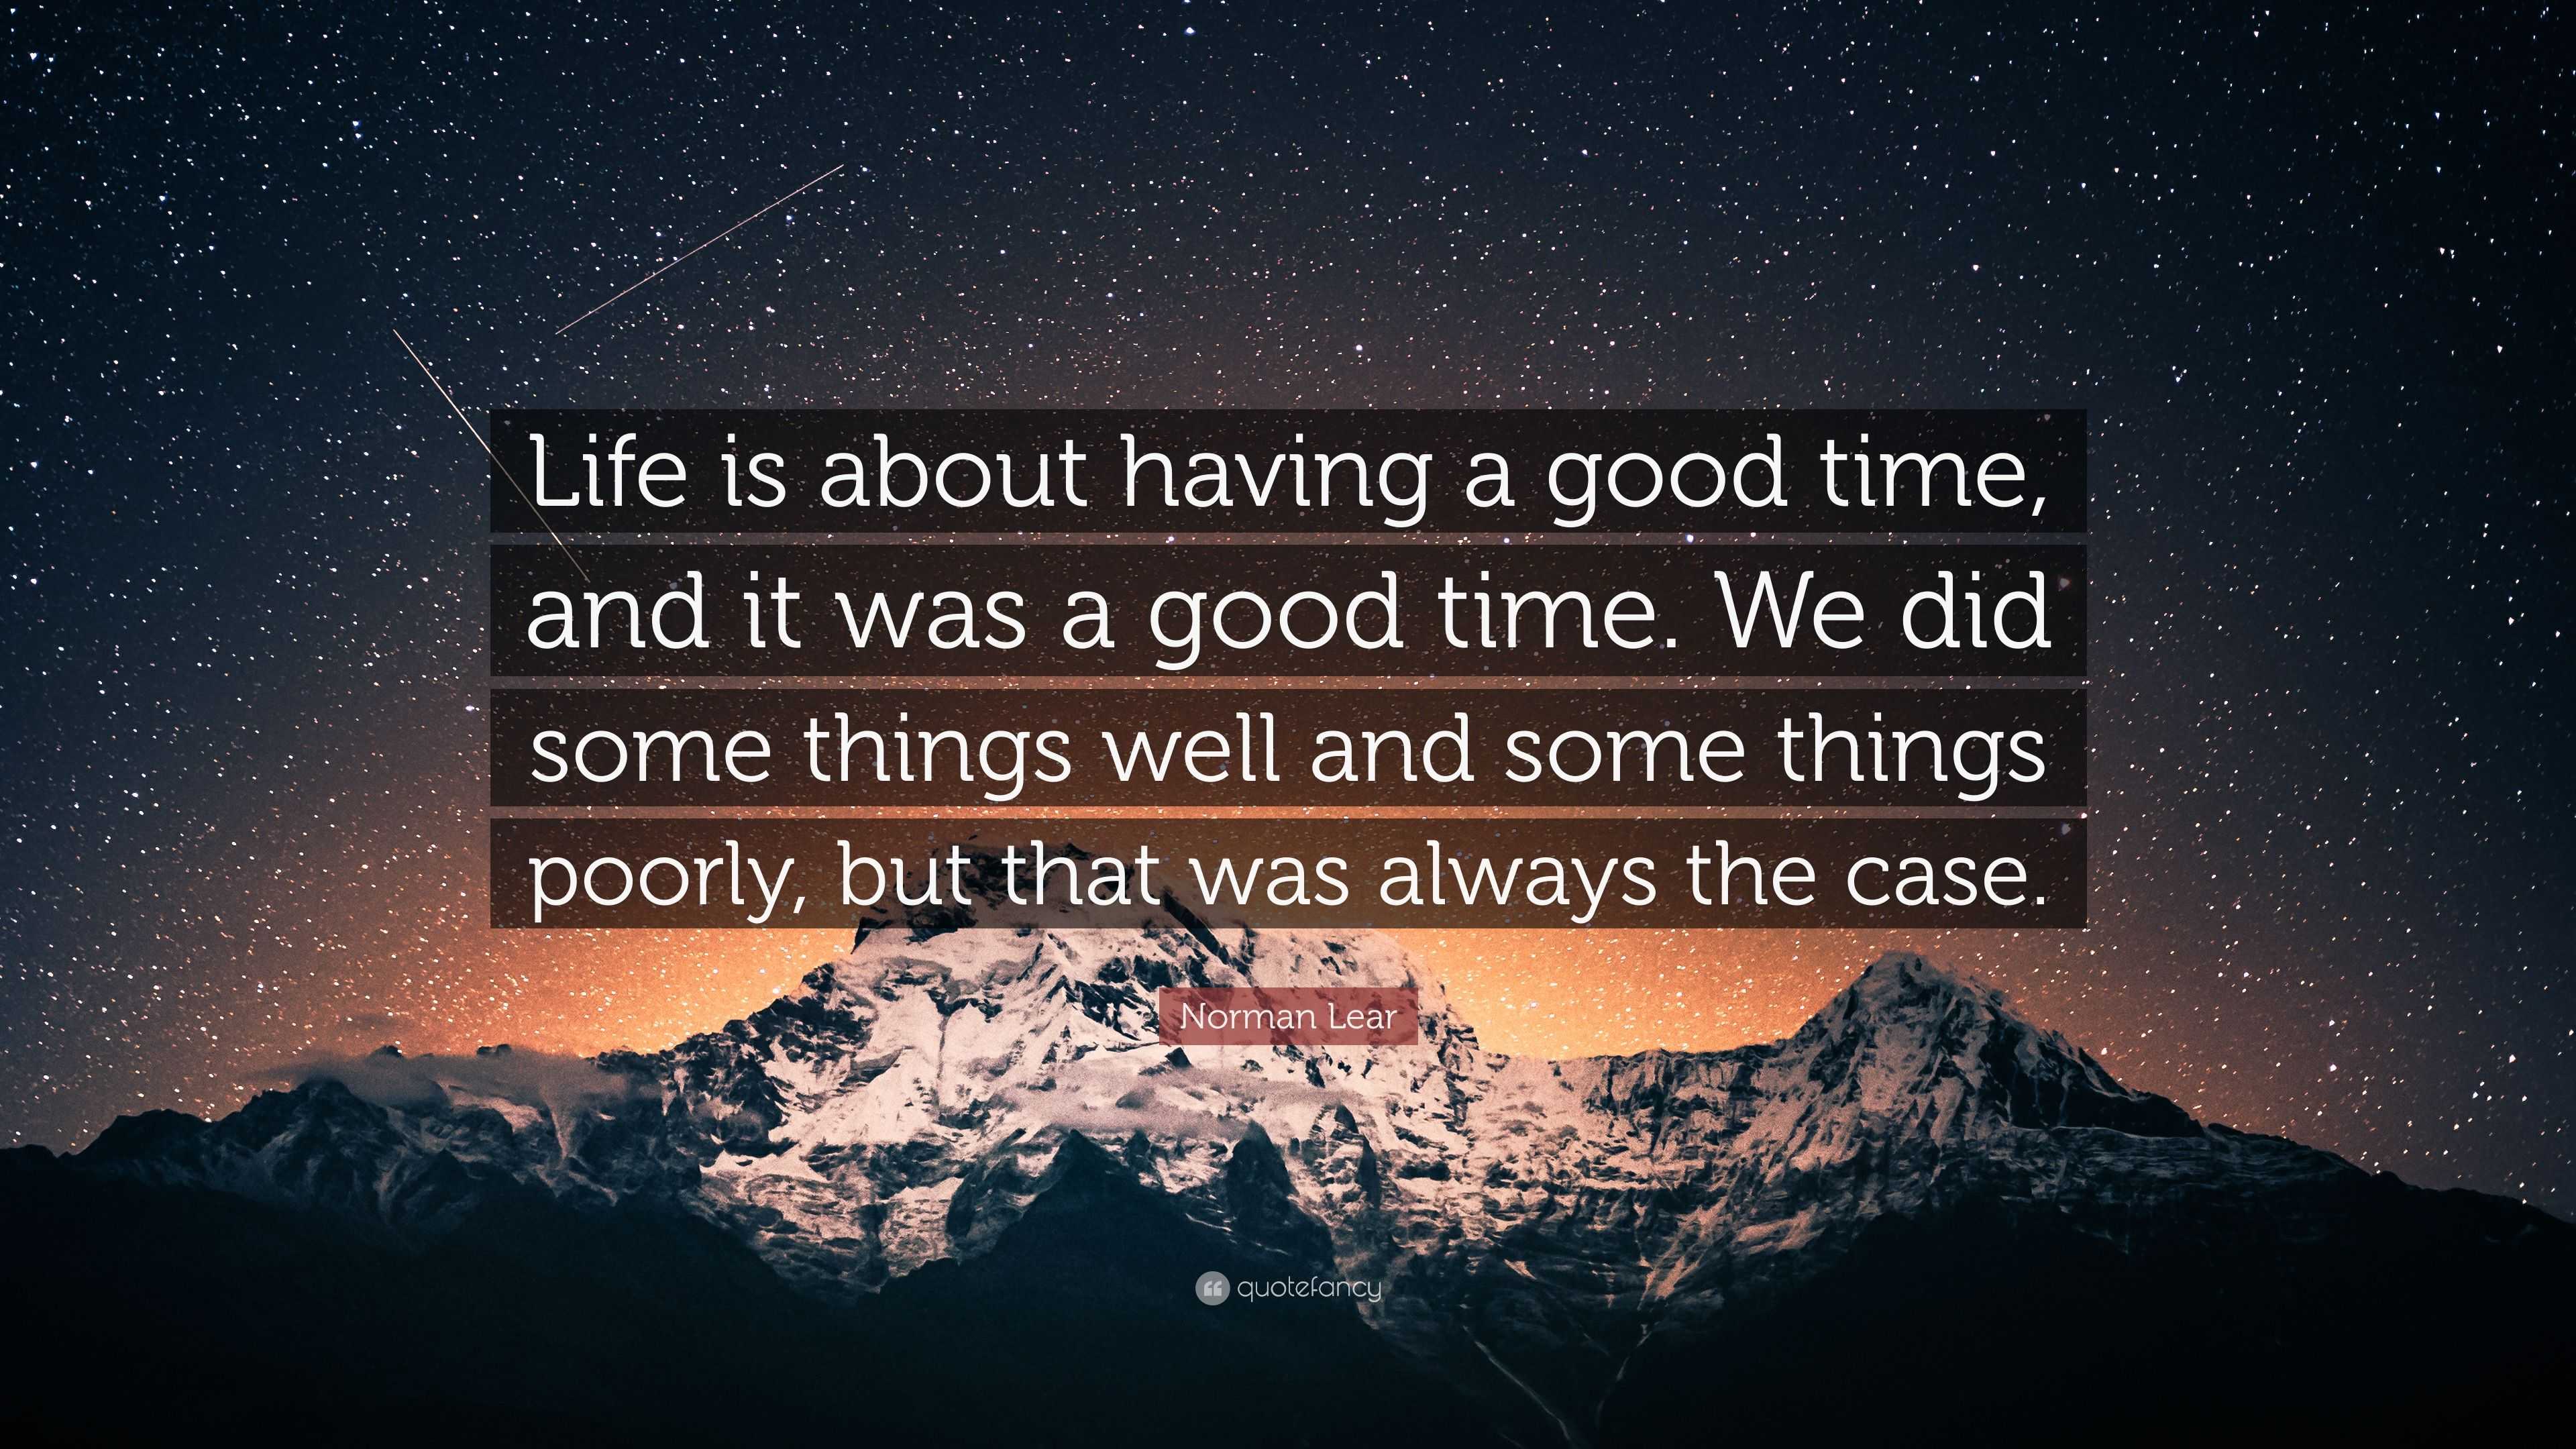 Norman Lear Quote: “Life is about a good time, and it was time. We did some things well and some things poorly, but that was a...”